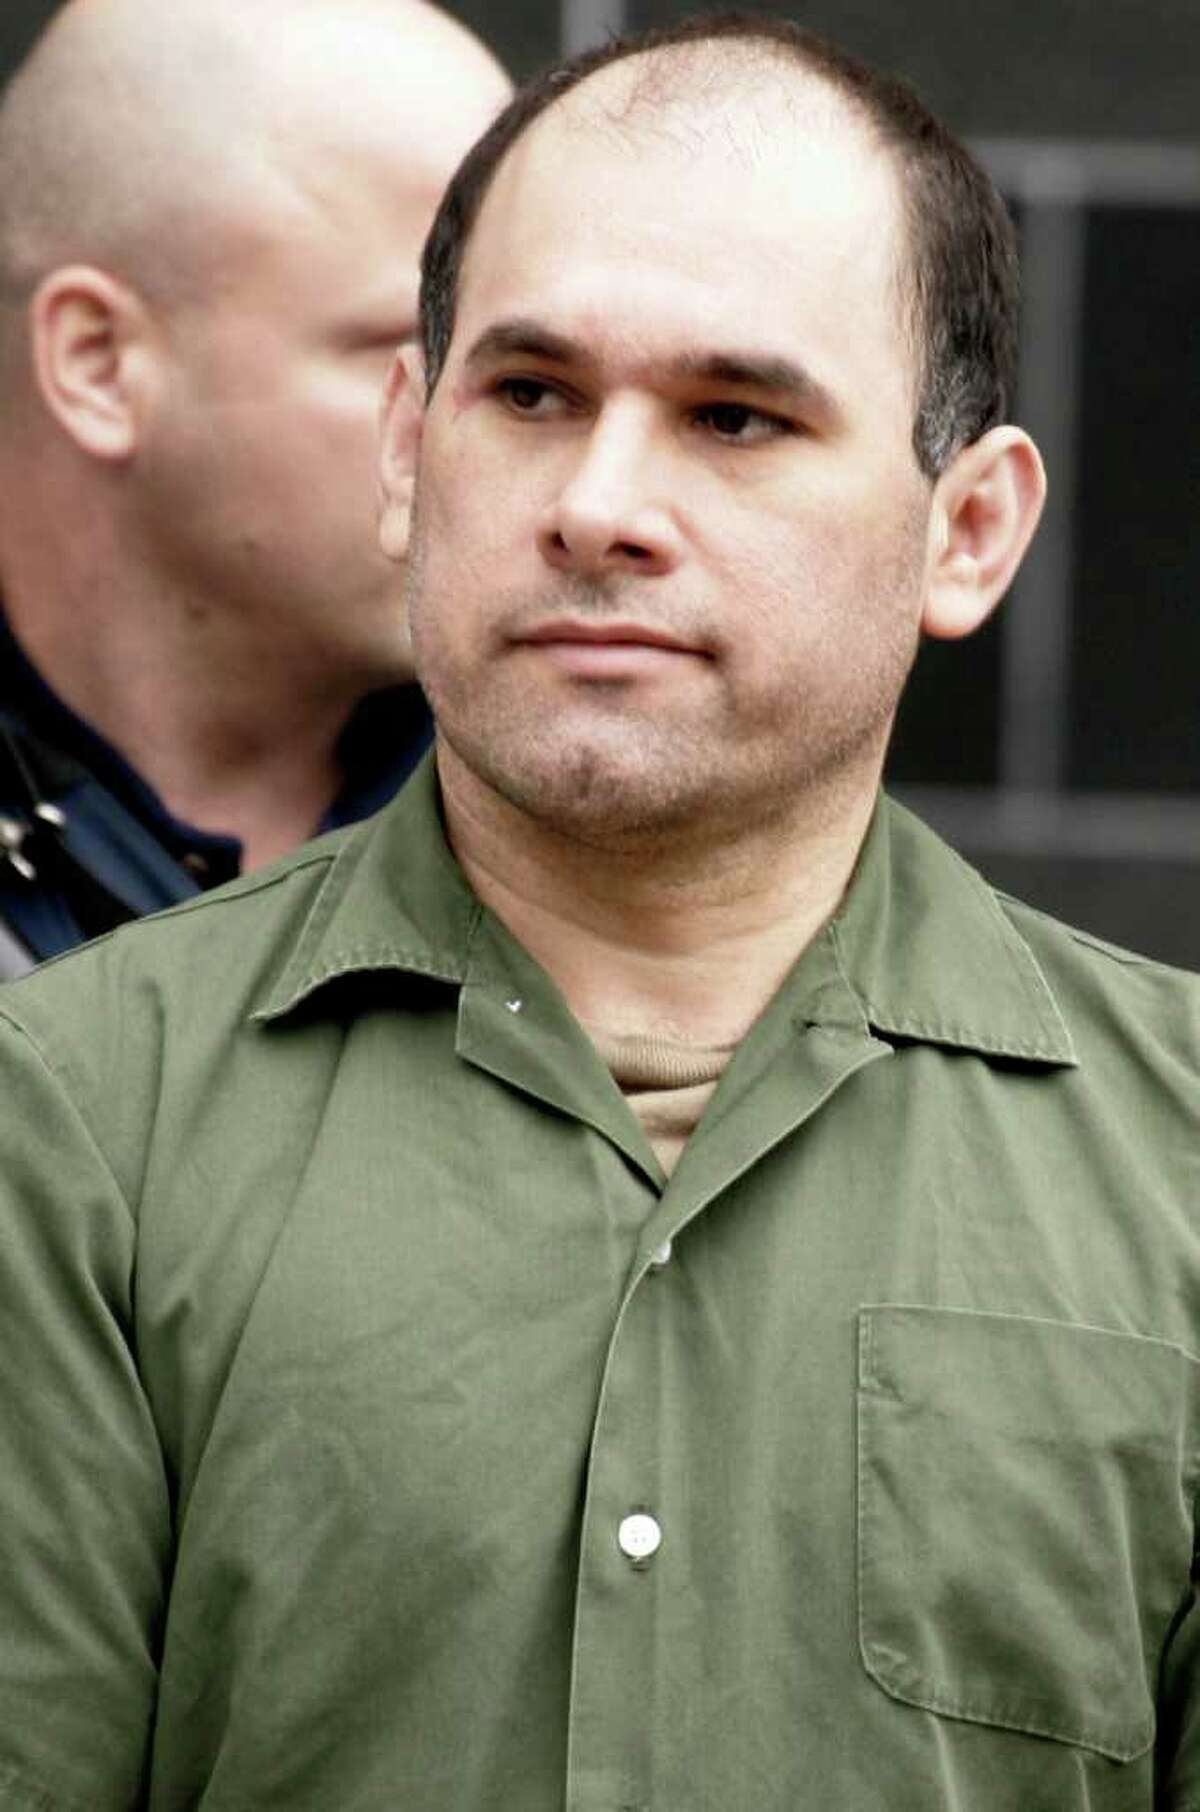 Osiel Cárdenas Guillén, known as “Friend Killer” for allegedly knocking off pals who crossed him, former Gulf Cartel boss who created the Zetas enforcement squad. Extradited from Mexico to Houston in 2007 to face trial, he’s been held at a variety of state and federal facilities; currently at the federal supermax prison in Colorado and will serve time until 2024.